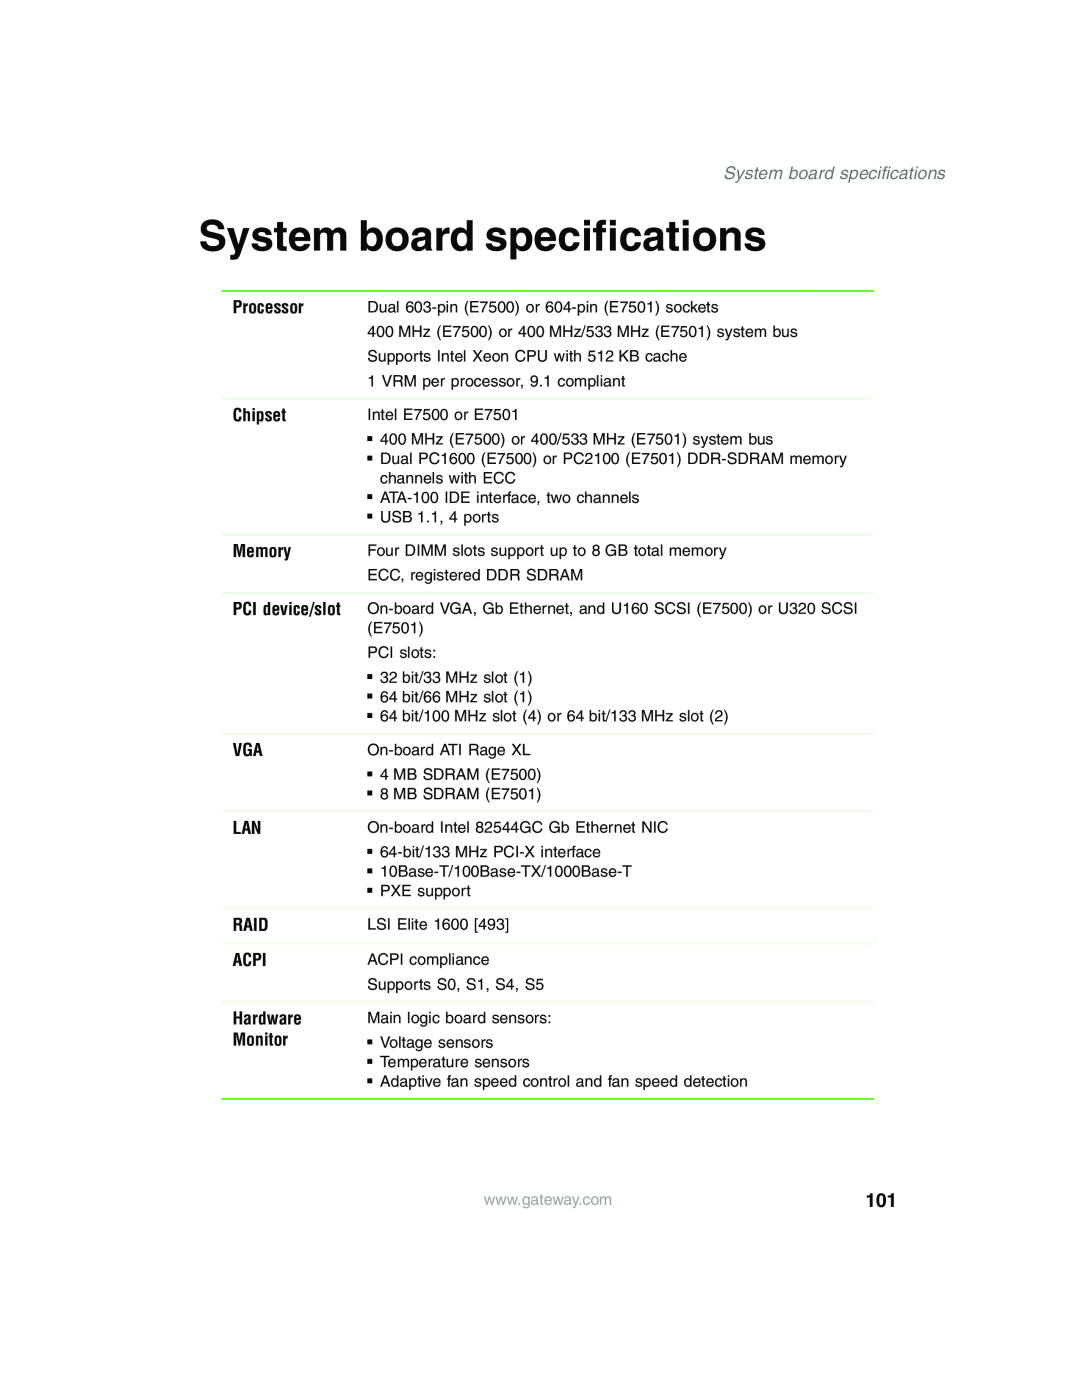 Gateway 980 manual System board specifications, Processor, Chipset, Memory, PCI device/slot, Raid, Acpi, Hardware, Monitor 